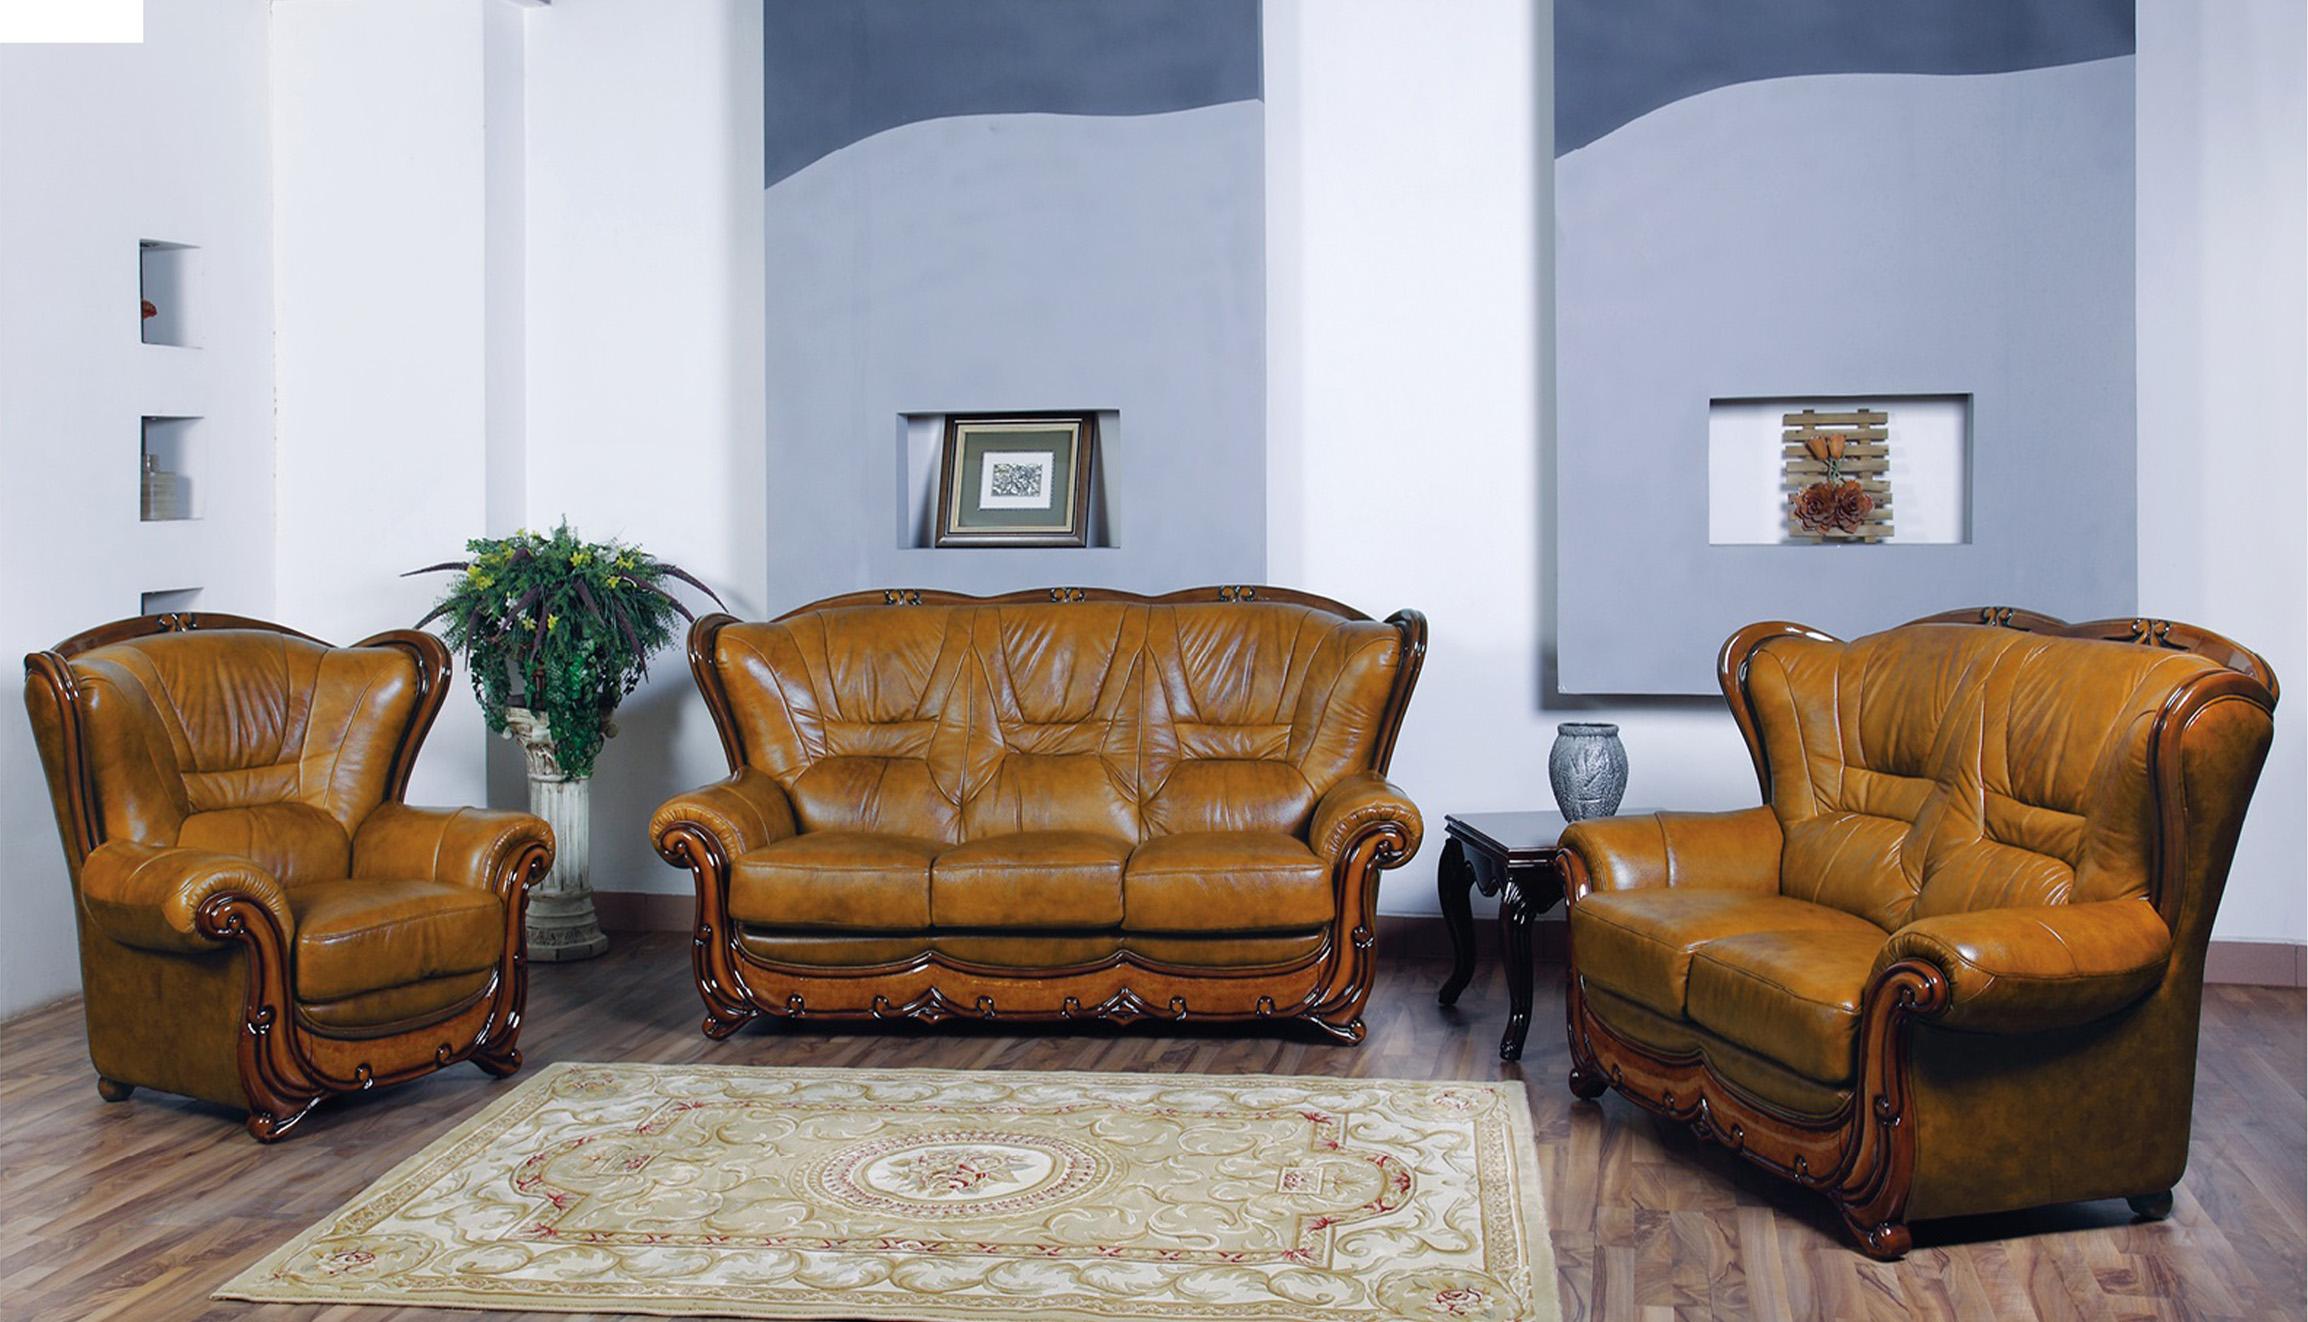 Contemporary, Modern Sofa Set 1003 1003-3PC in Brown Leather